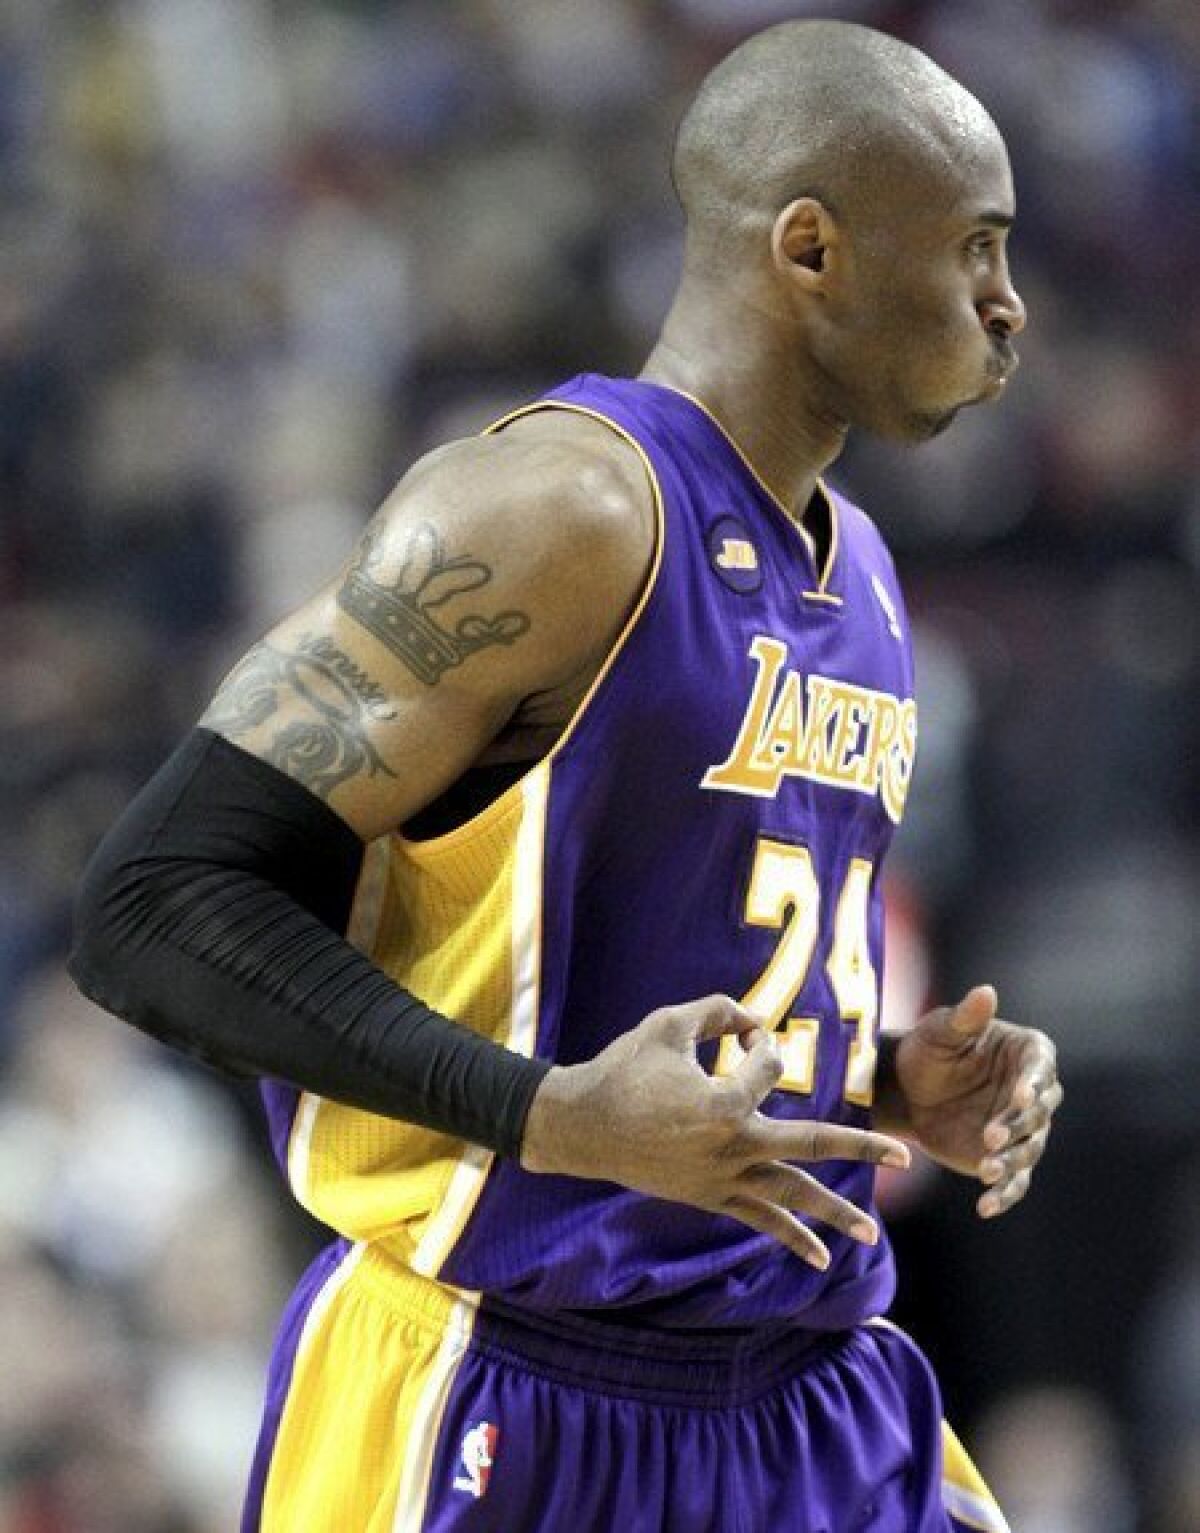 Lakers guard Kobe Bryant, shown playing against the Portland Trail Blazers last season, continues to work on his recovery from an Achilles tendon injury.